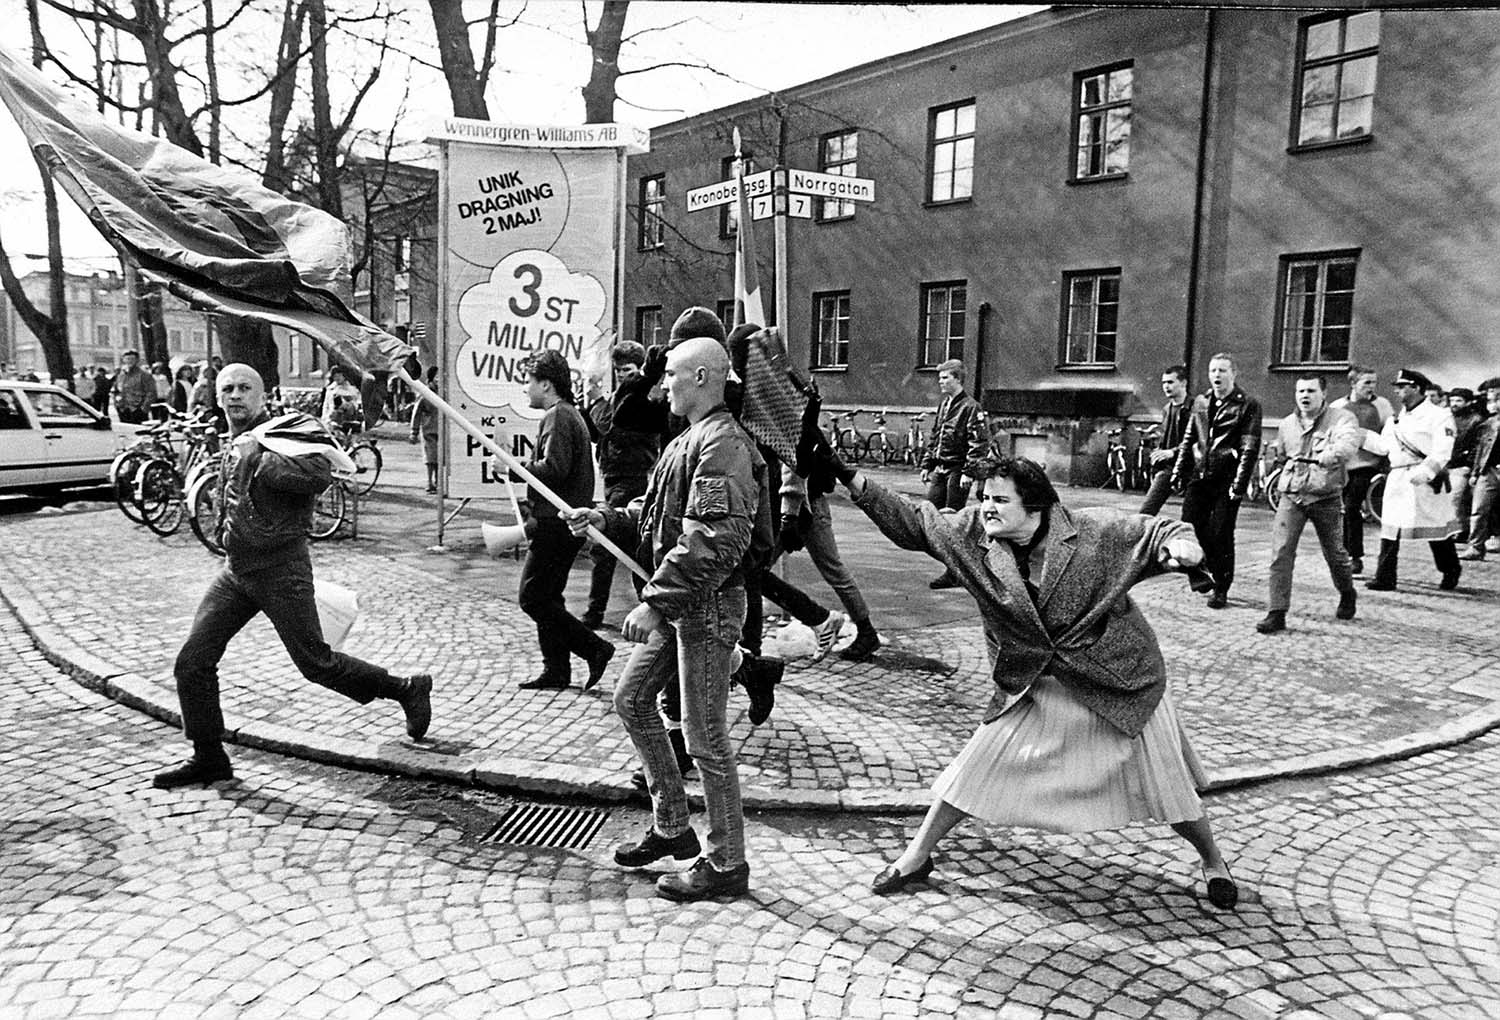 The Jewish Danielsson, whose mother survived Auschwitz, struck the skinhead during a march in the Swedish town of Växjö, 1985.